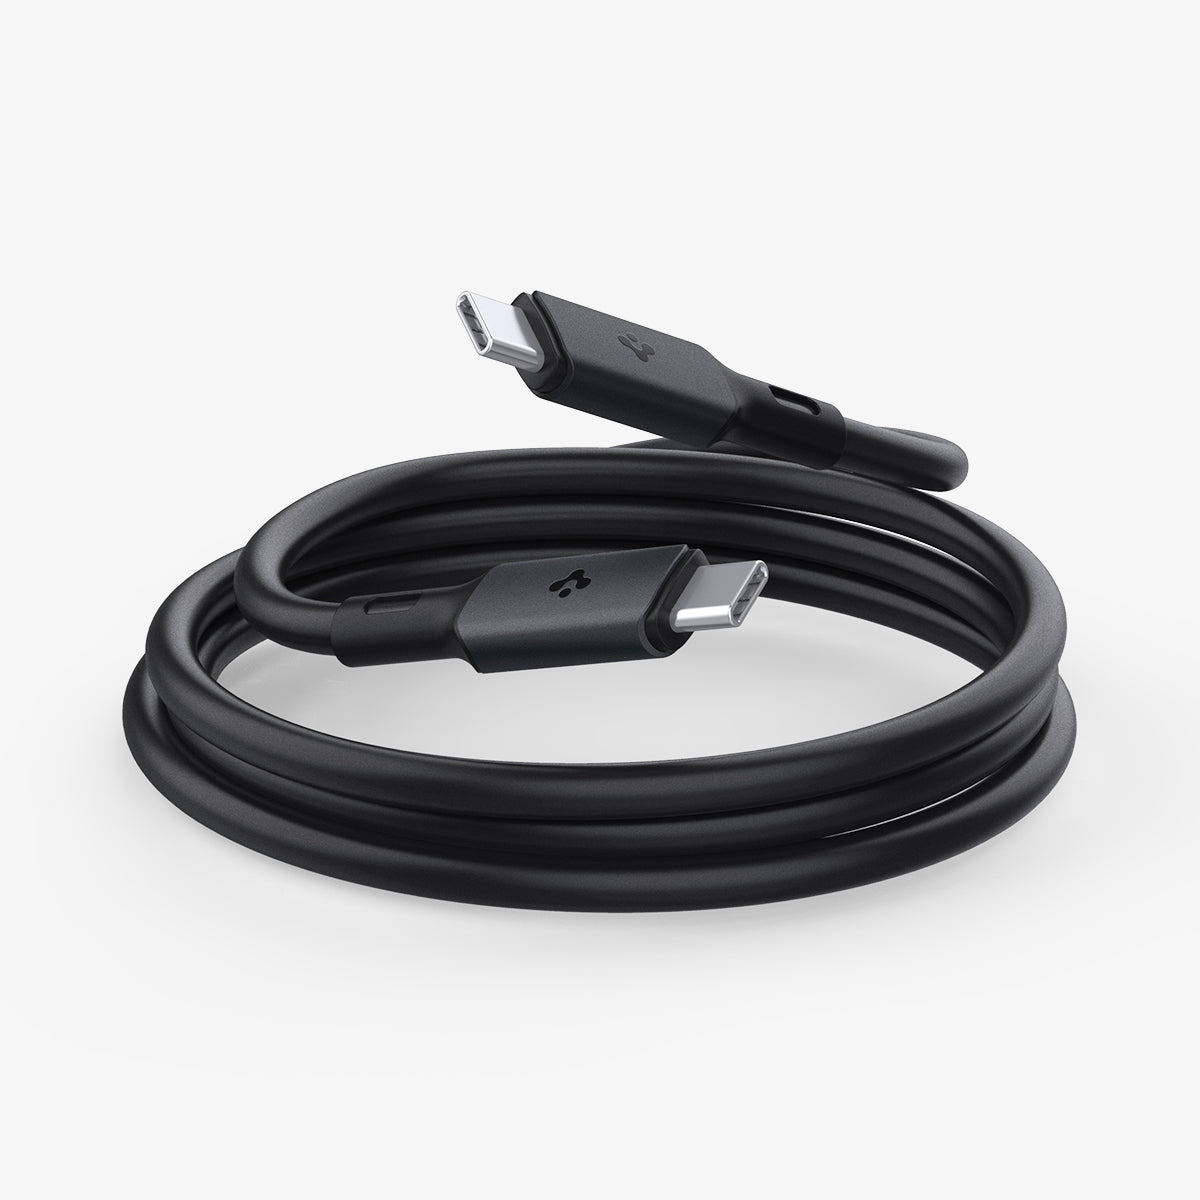 ACA06839 - ArcWire™ USB-C to USB-C Cable PB2202 in Black showing the 2 head pins of a charger cable rolled up for storage